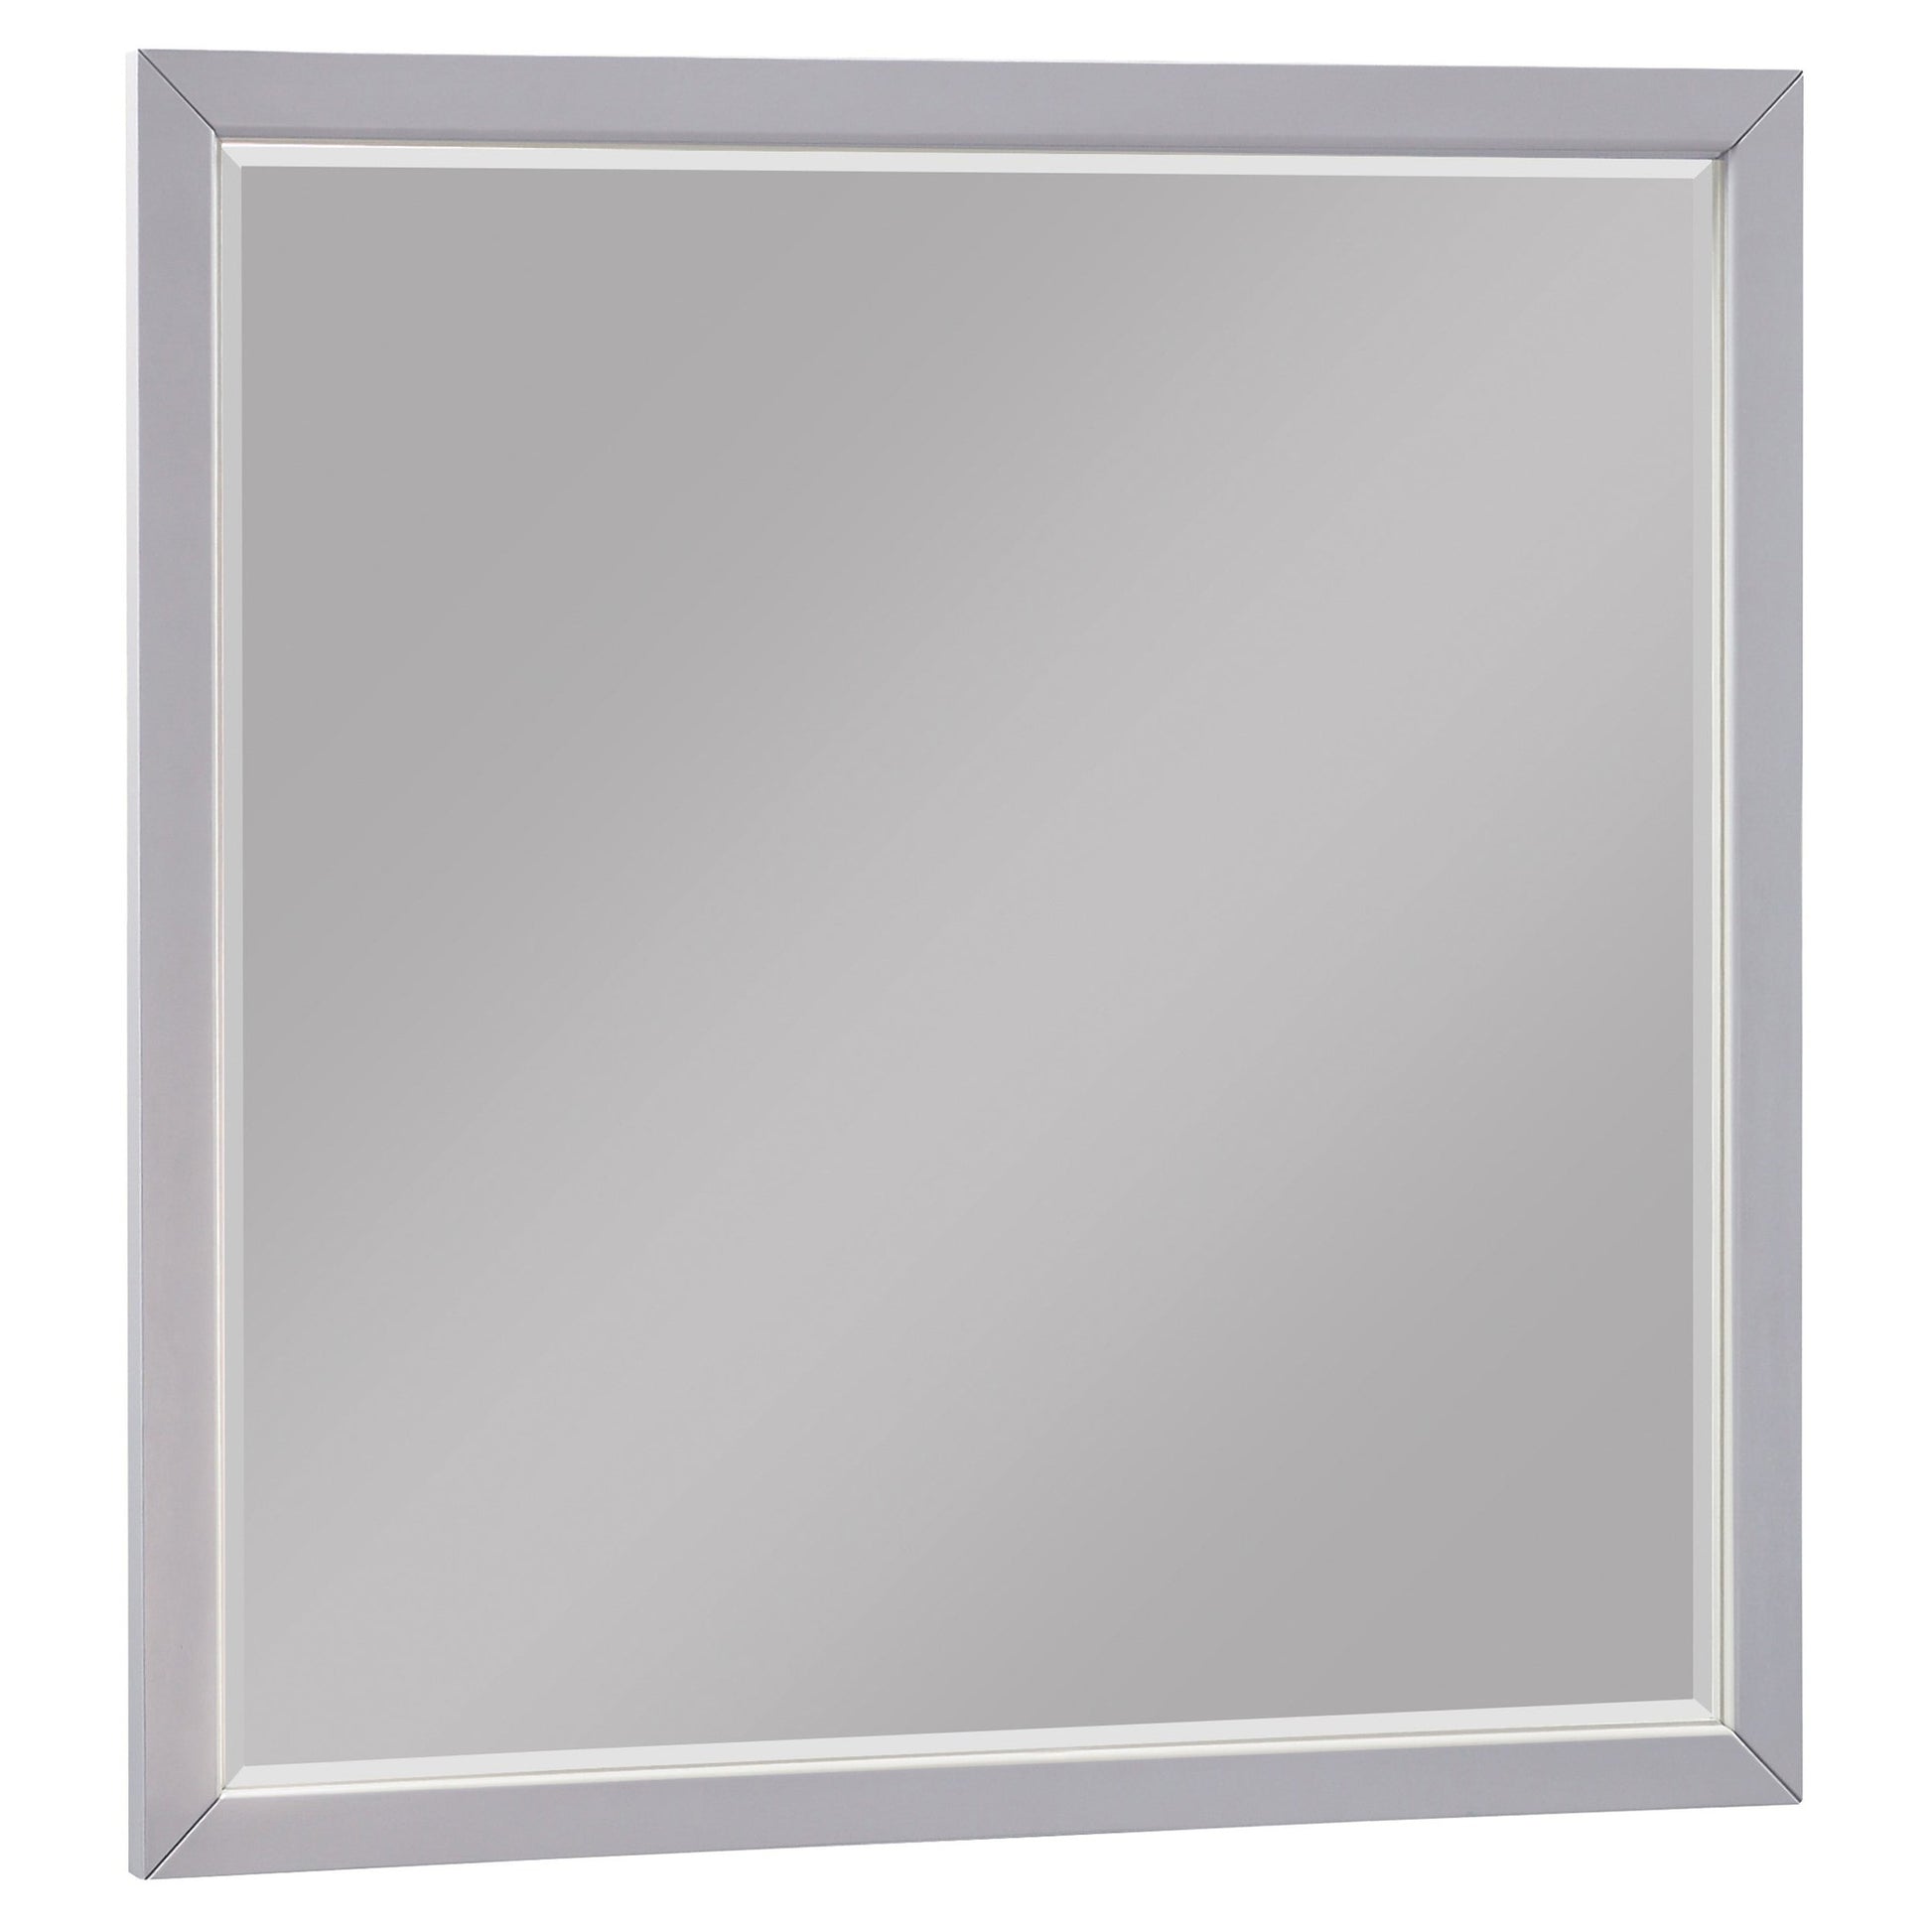 Benzara Gray Transitional Style Square Wooden Frame Mirror